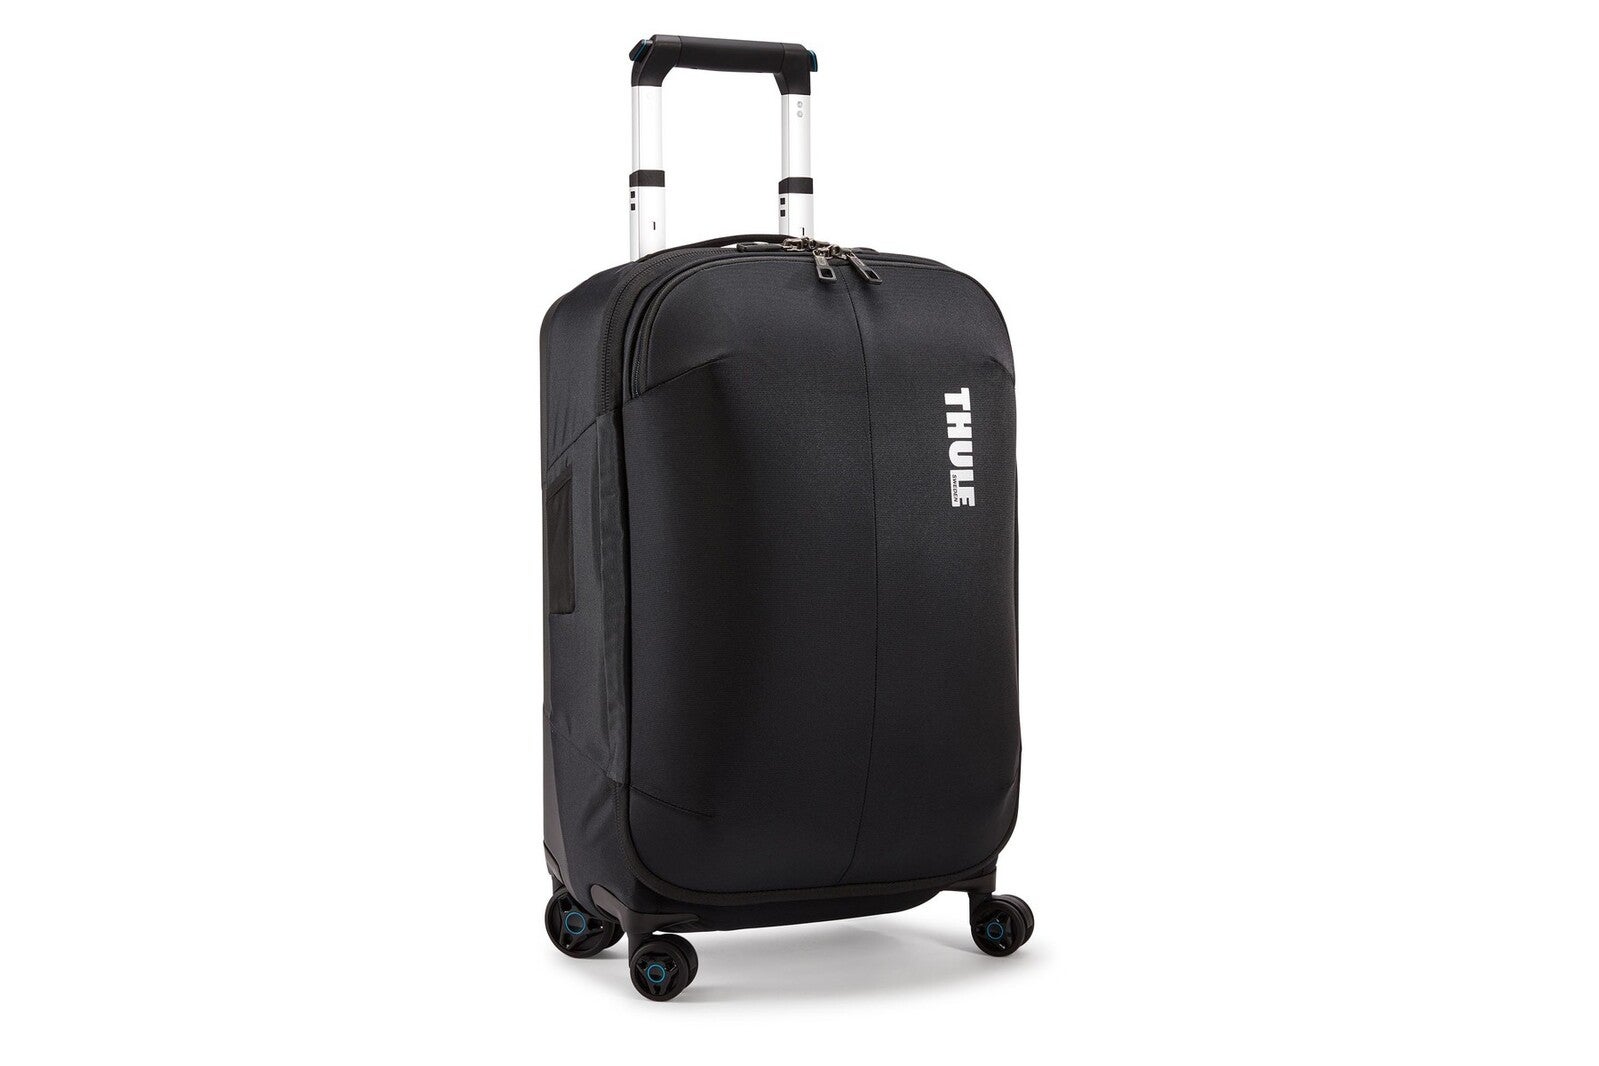 Thule Subterra 33L/55cm Carry On Spinner Travel Luggage Suitcase Wheeled Bag BLK